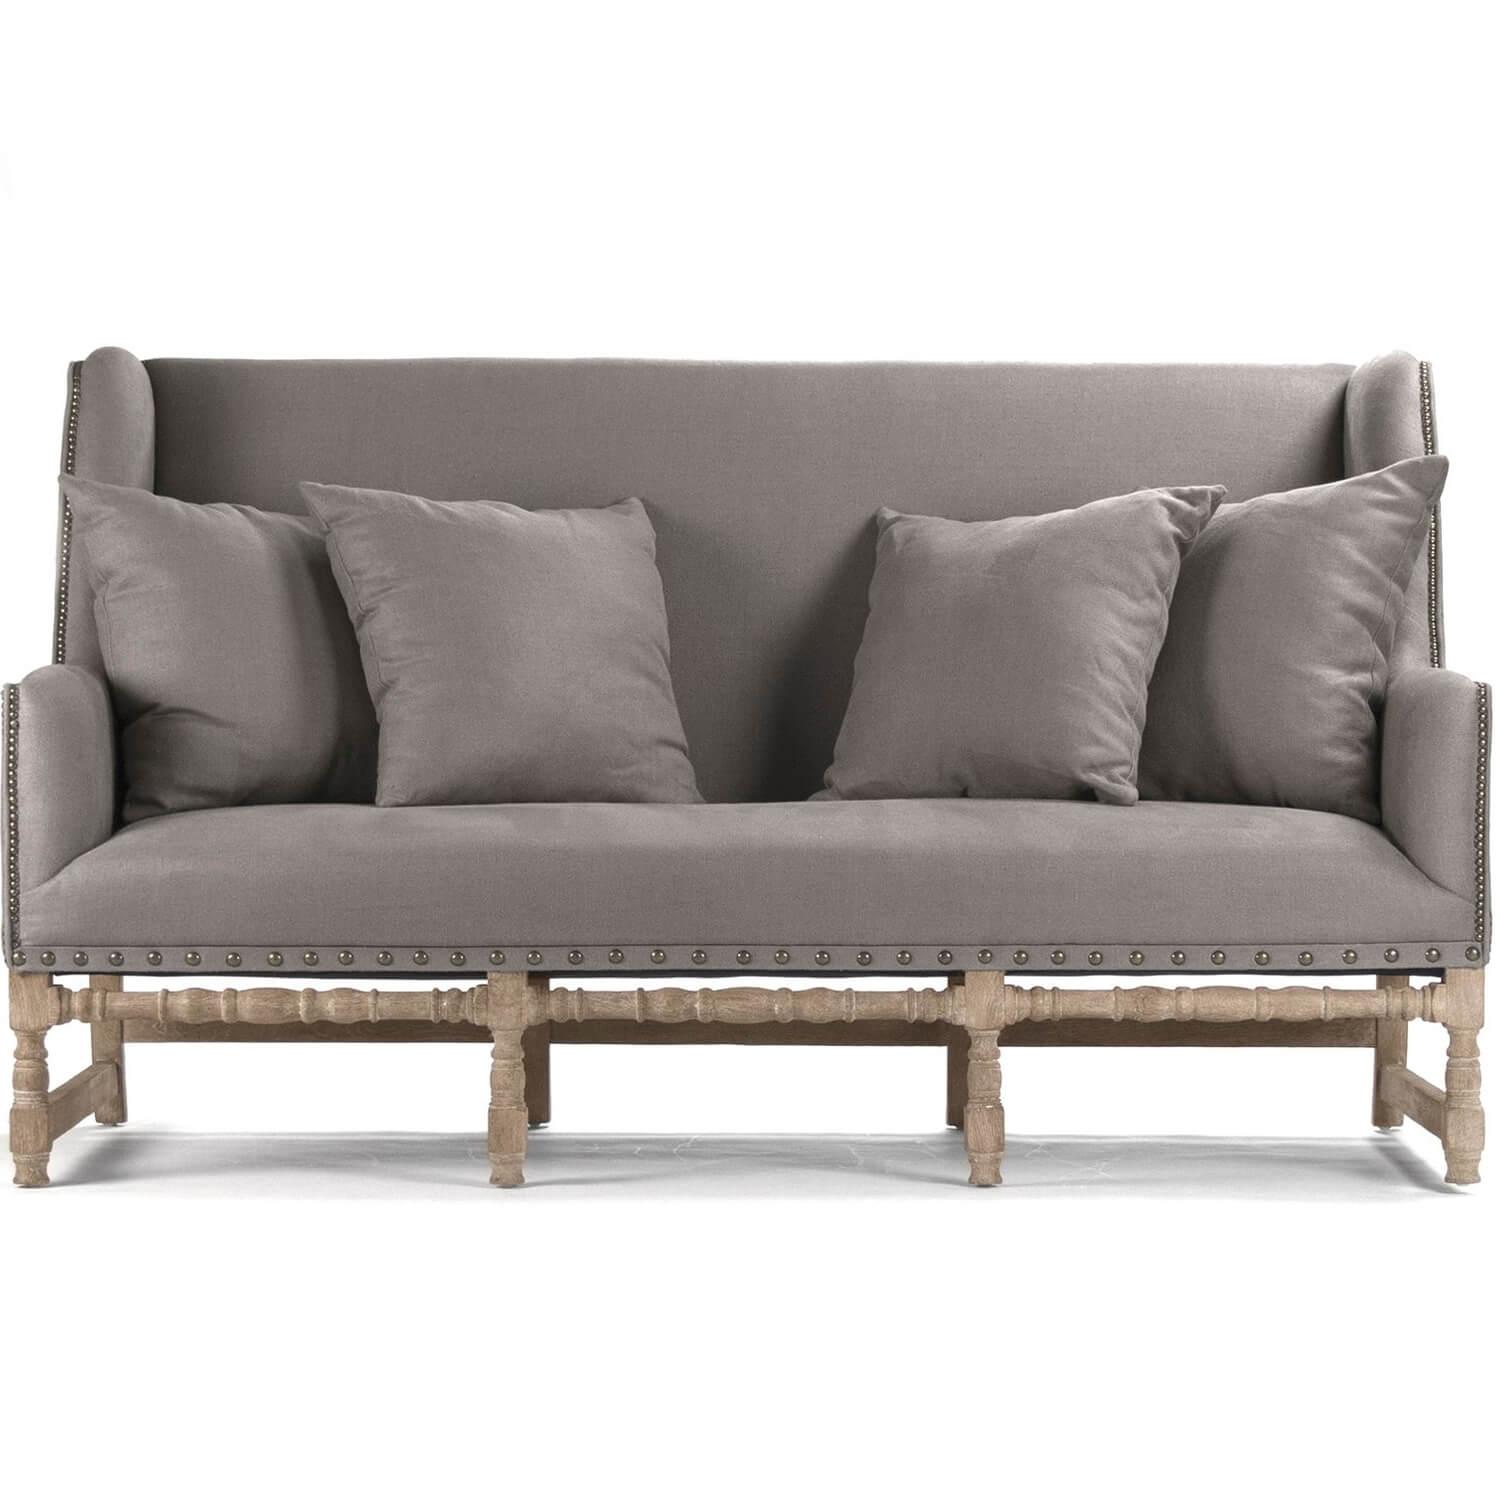 Smokey Gray Nail Studded Settee - Belle Escape